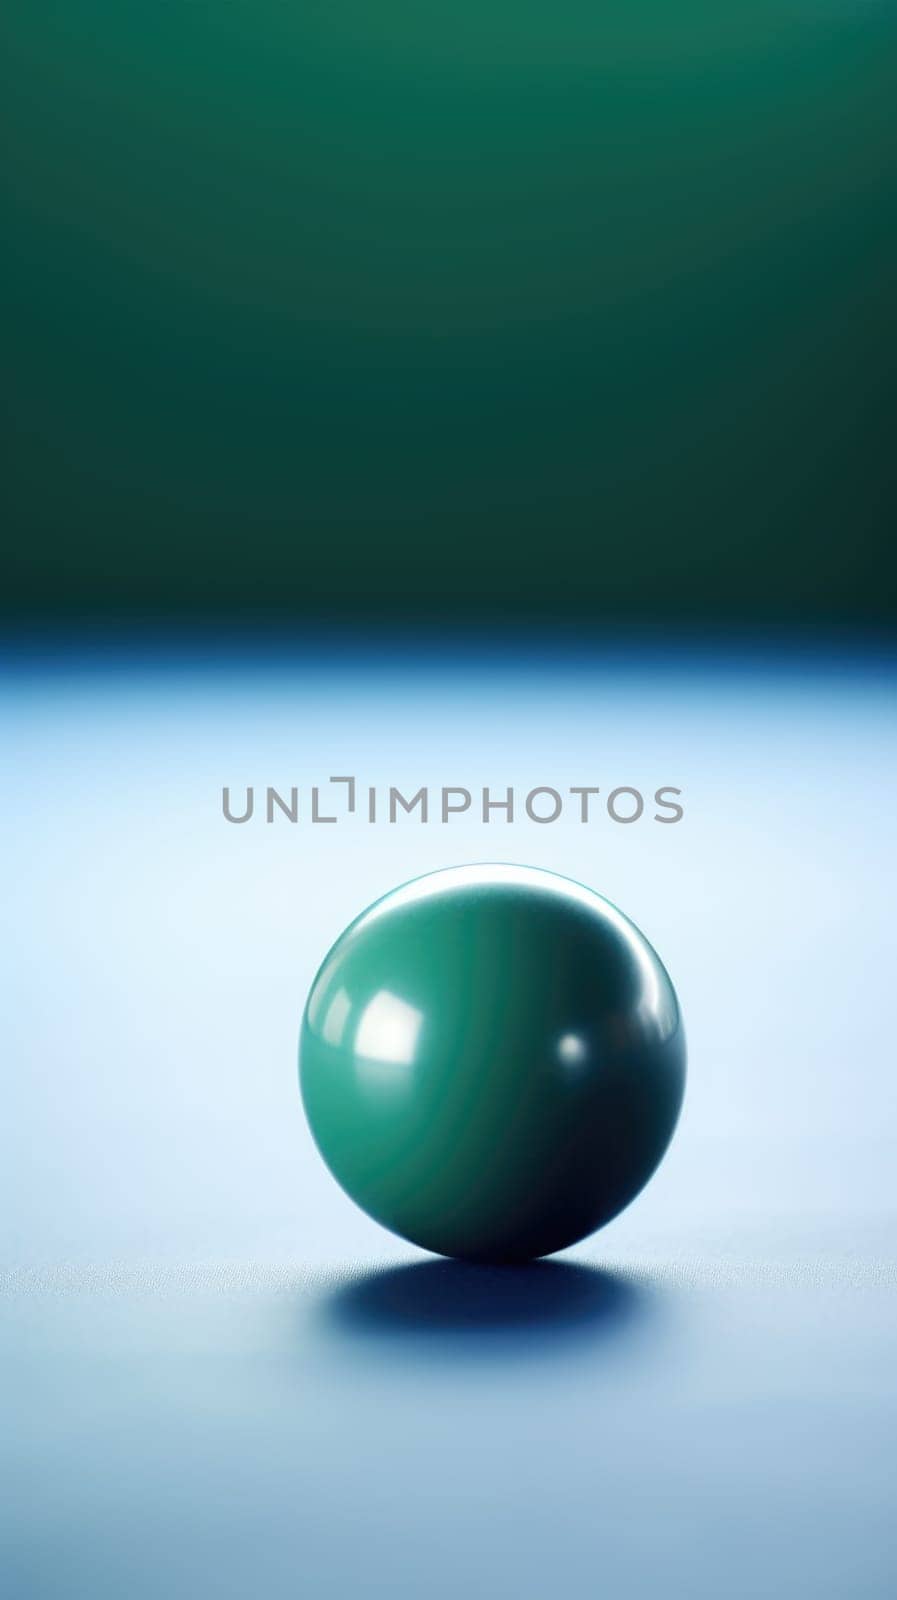 A green ball sitting on top of a blue surface, AI by starush